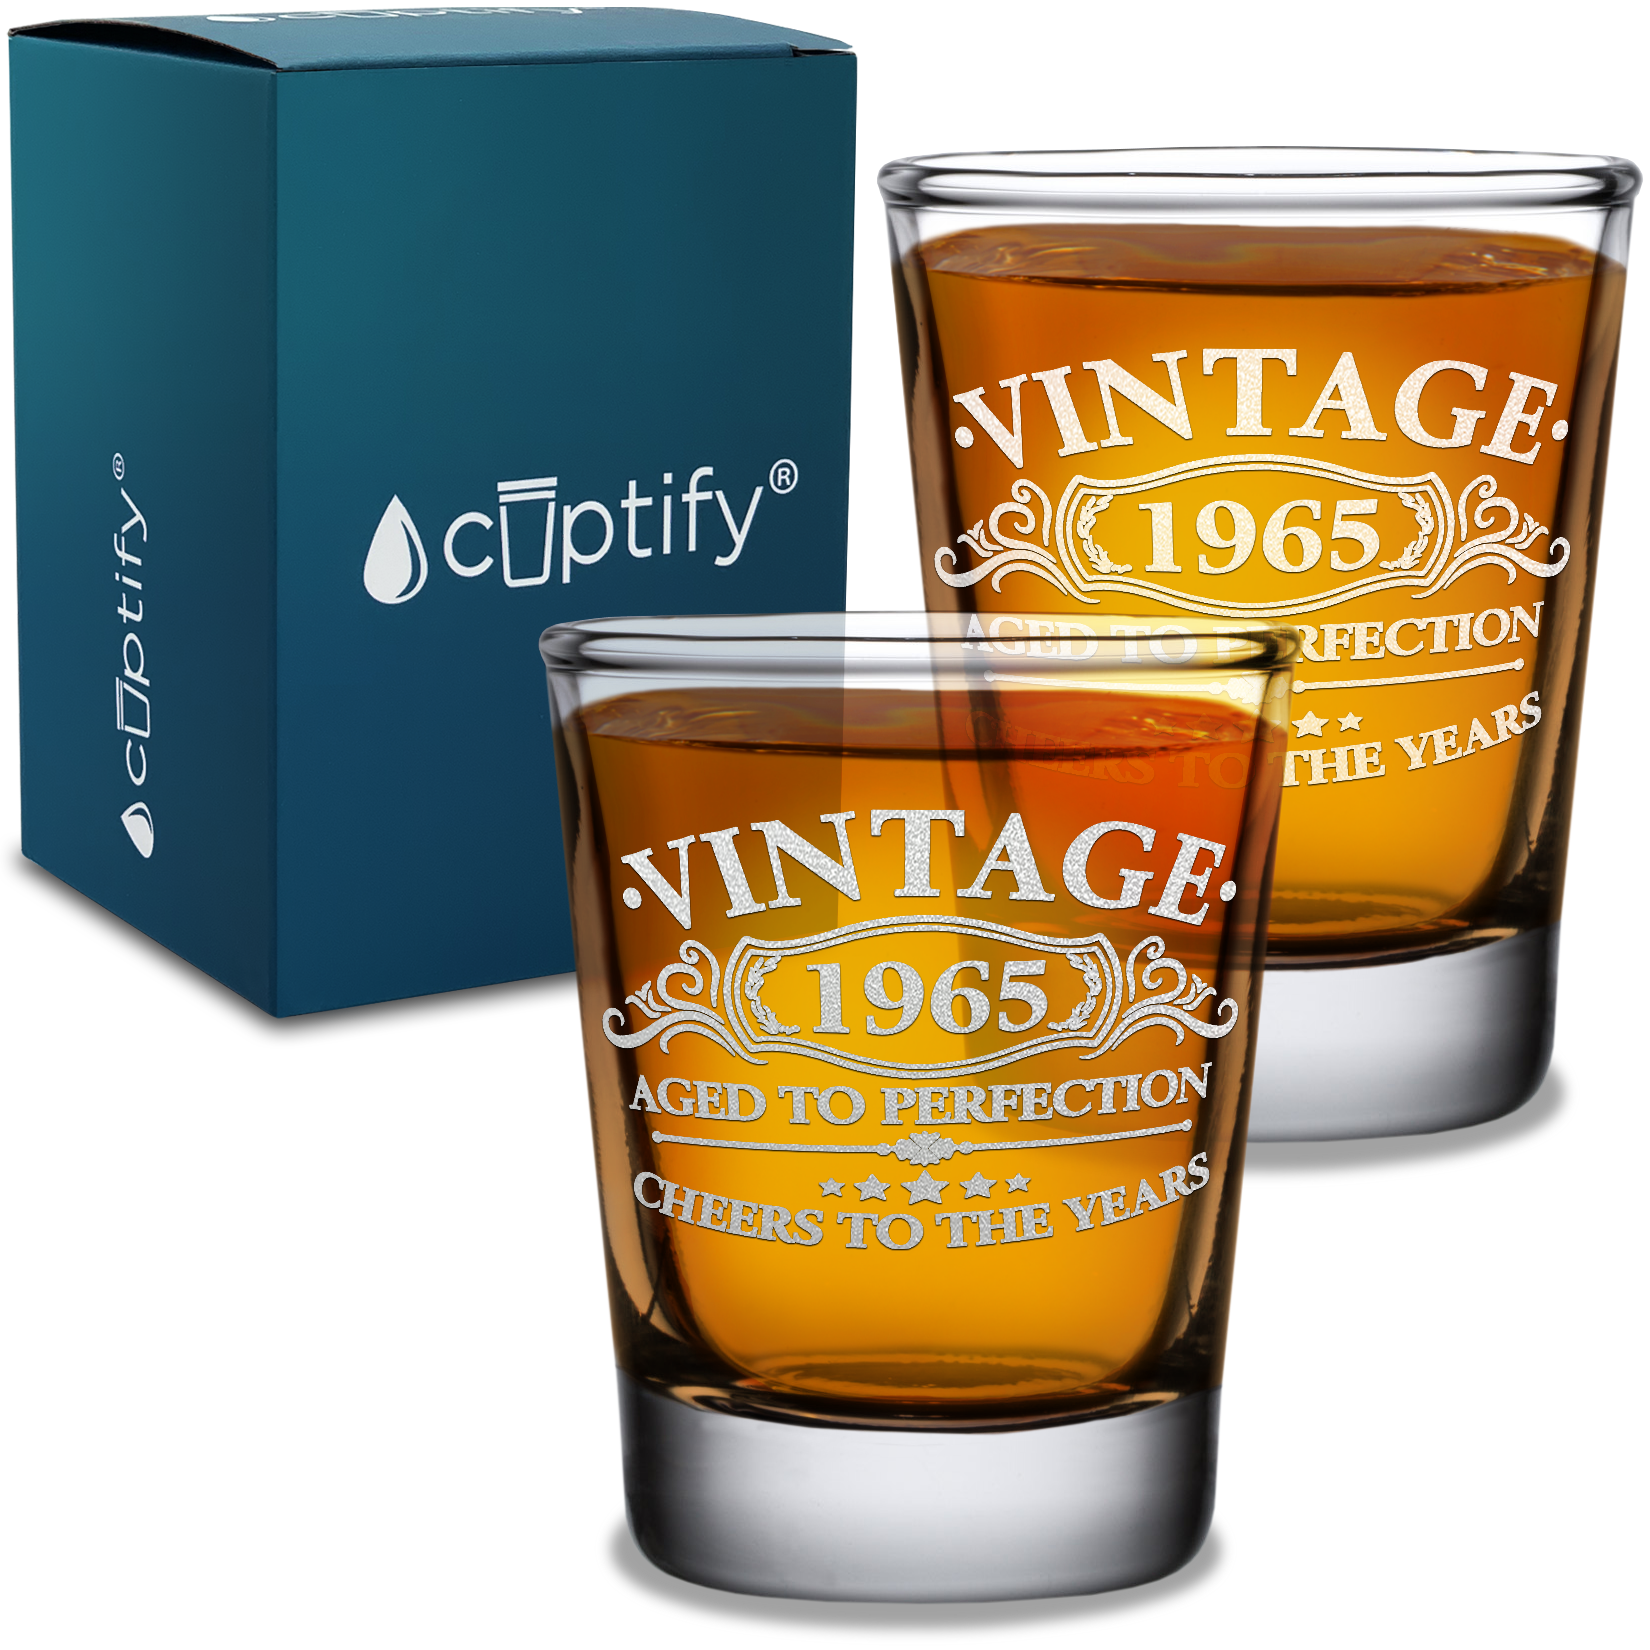 56th Birthday Gift Vintage Aged To Perfection Cheers To 56 Years 1965 Laser Engraved on 2oz Shot Glasses - Set of 2